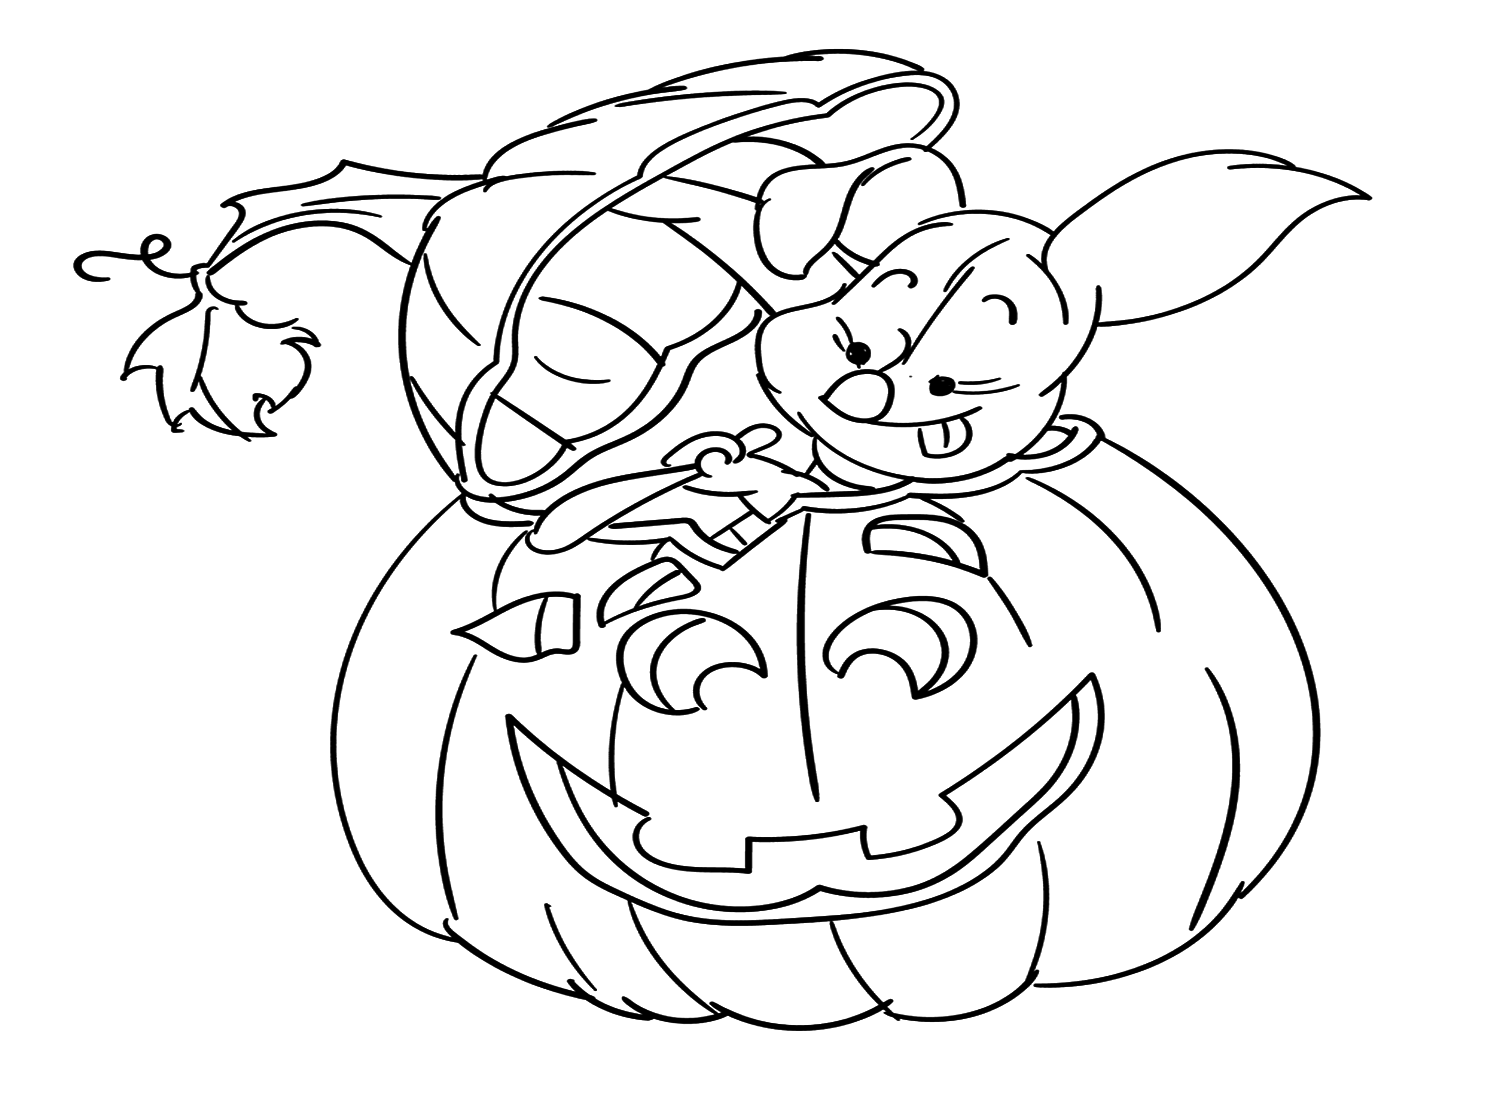 The Piglet Carving Halloween Pumpkin Coloring Pages